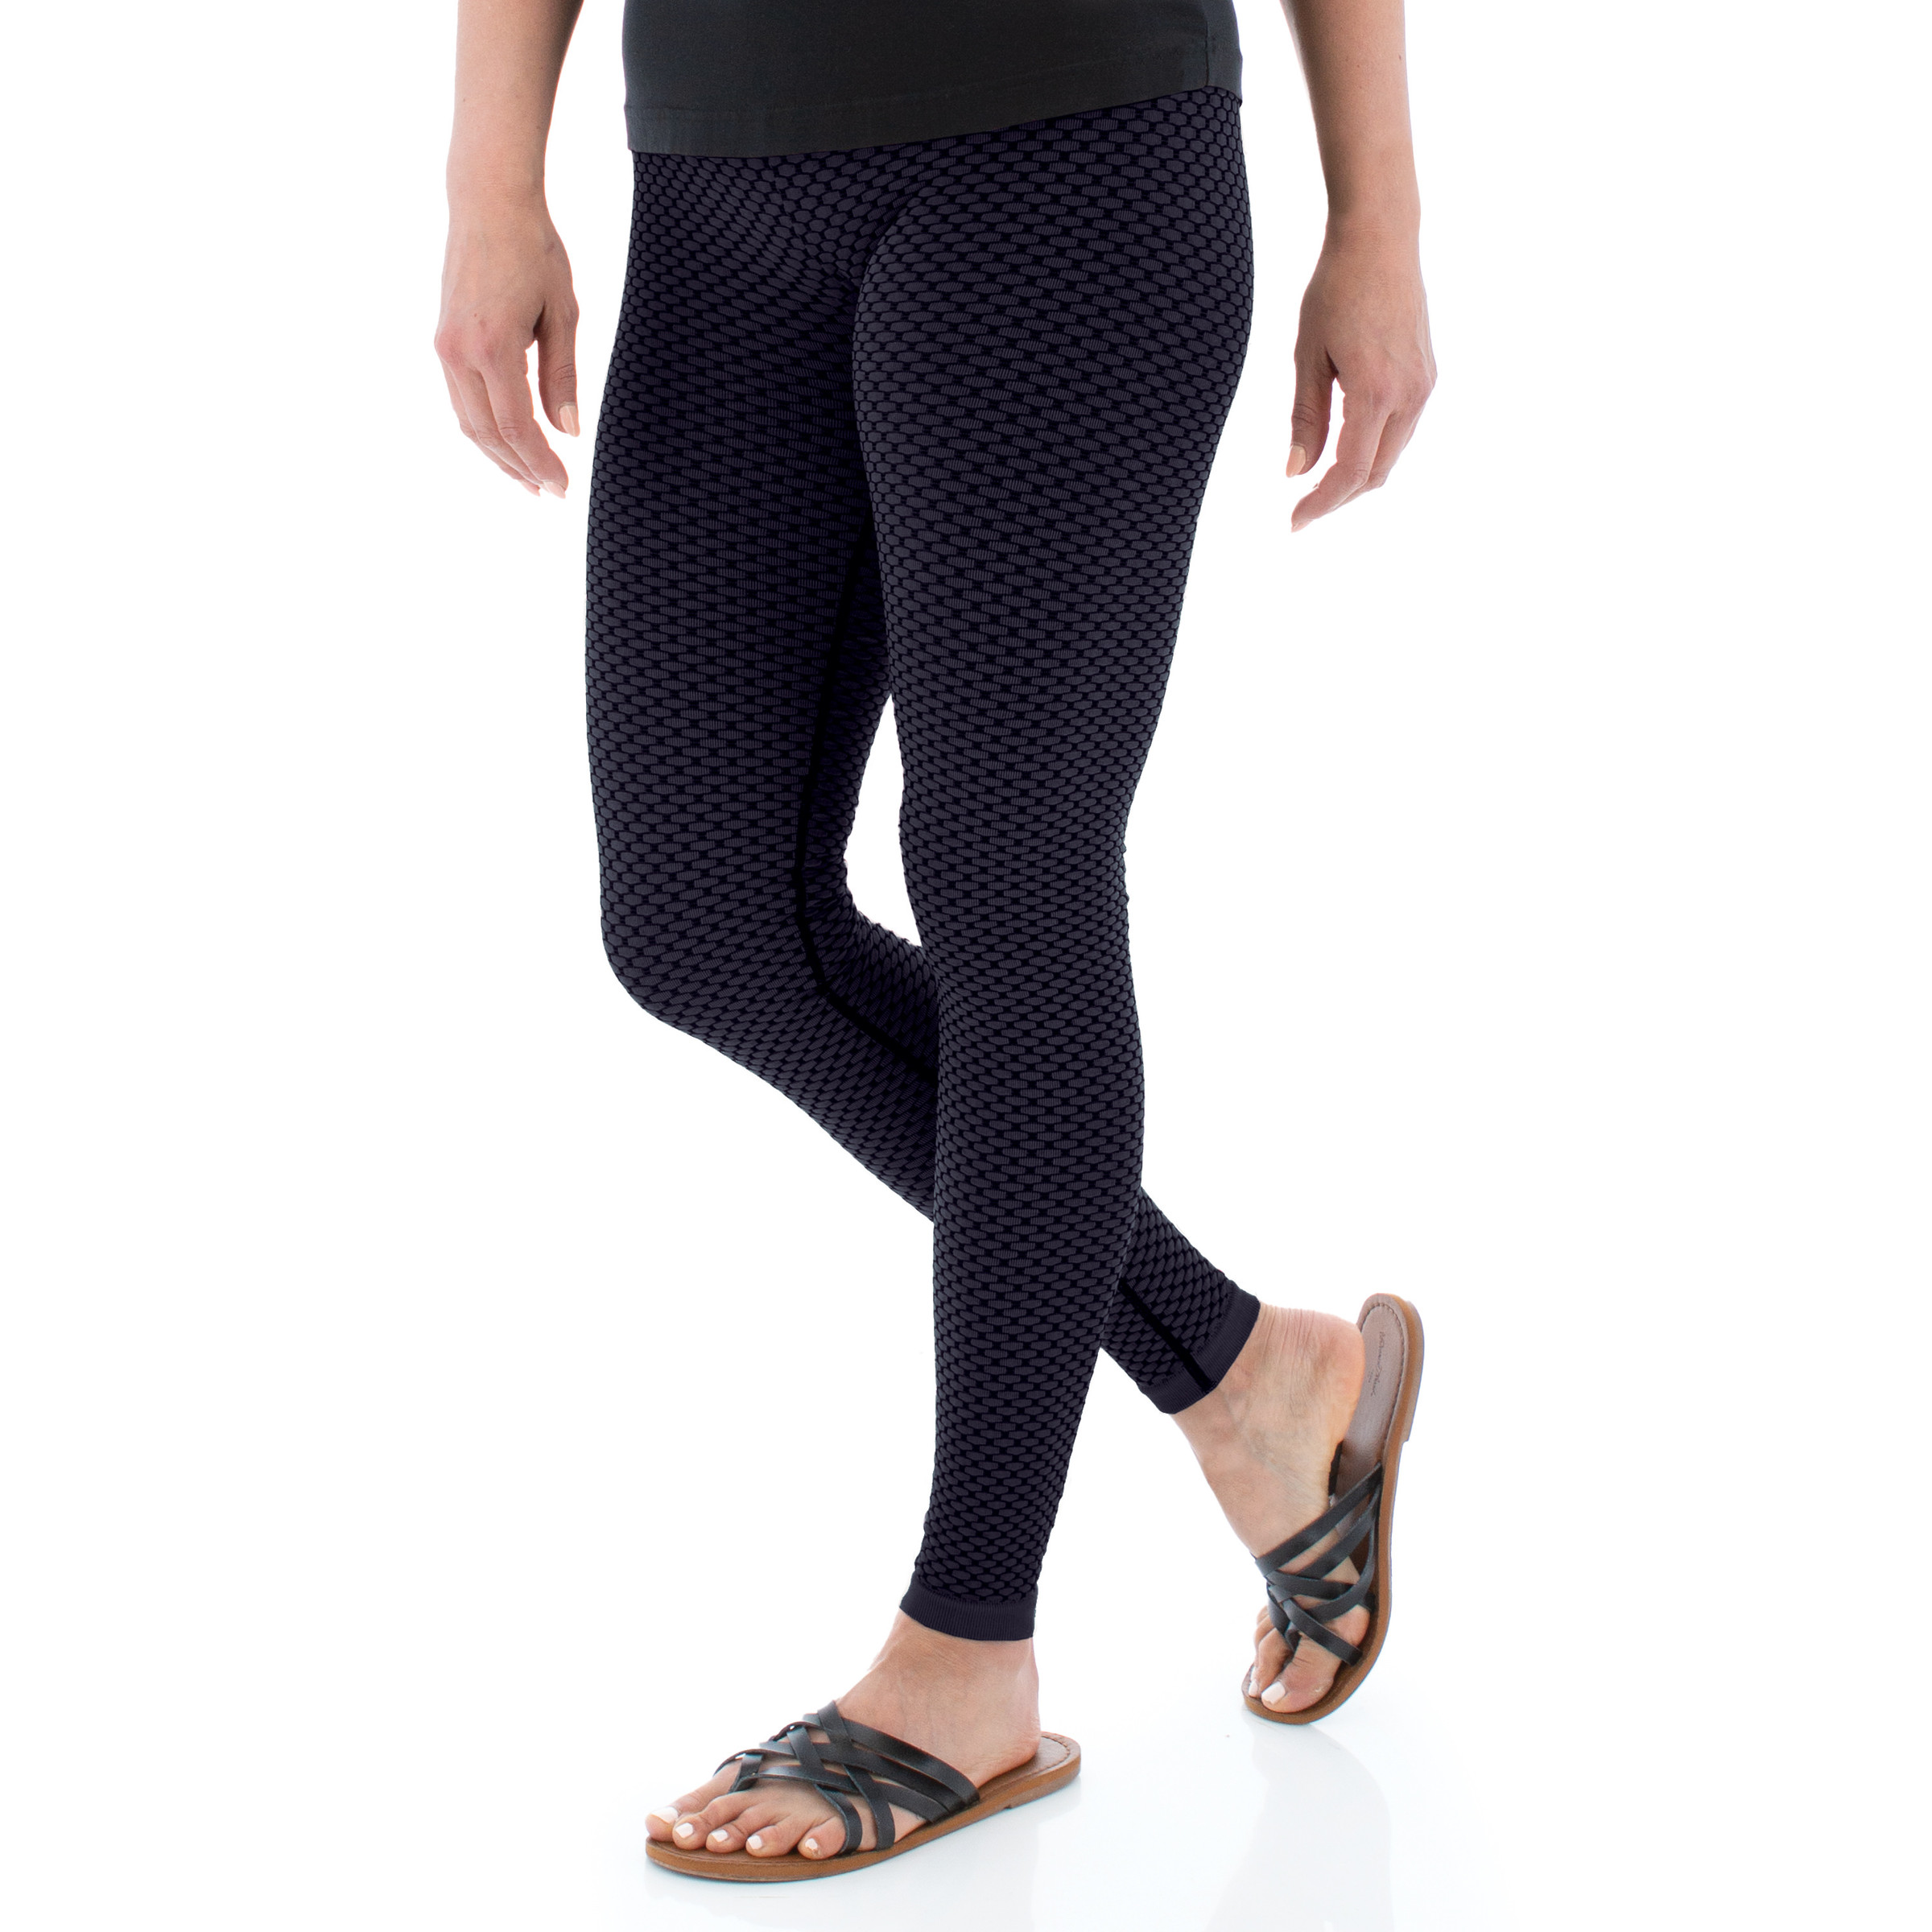 Women's Honeycomb Footless Tights